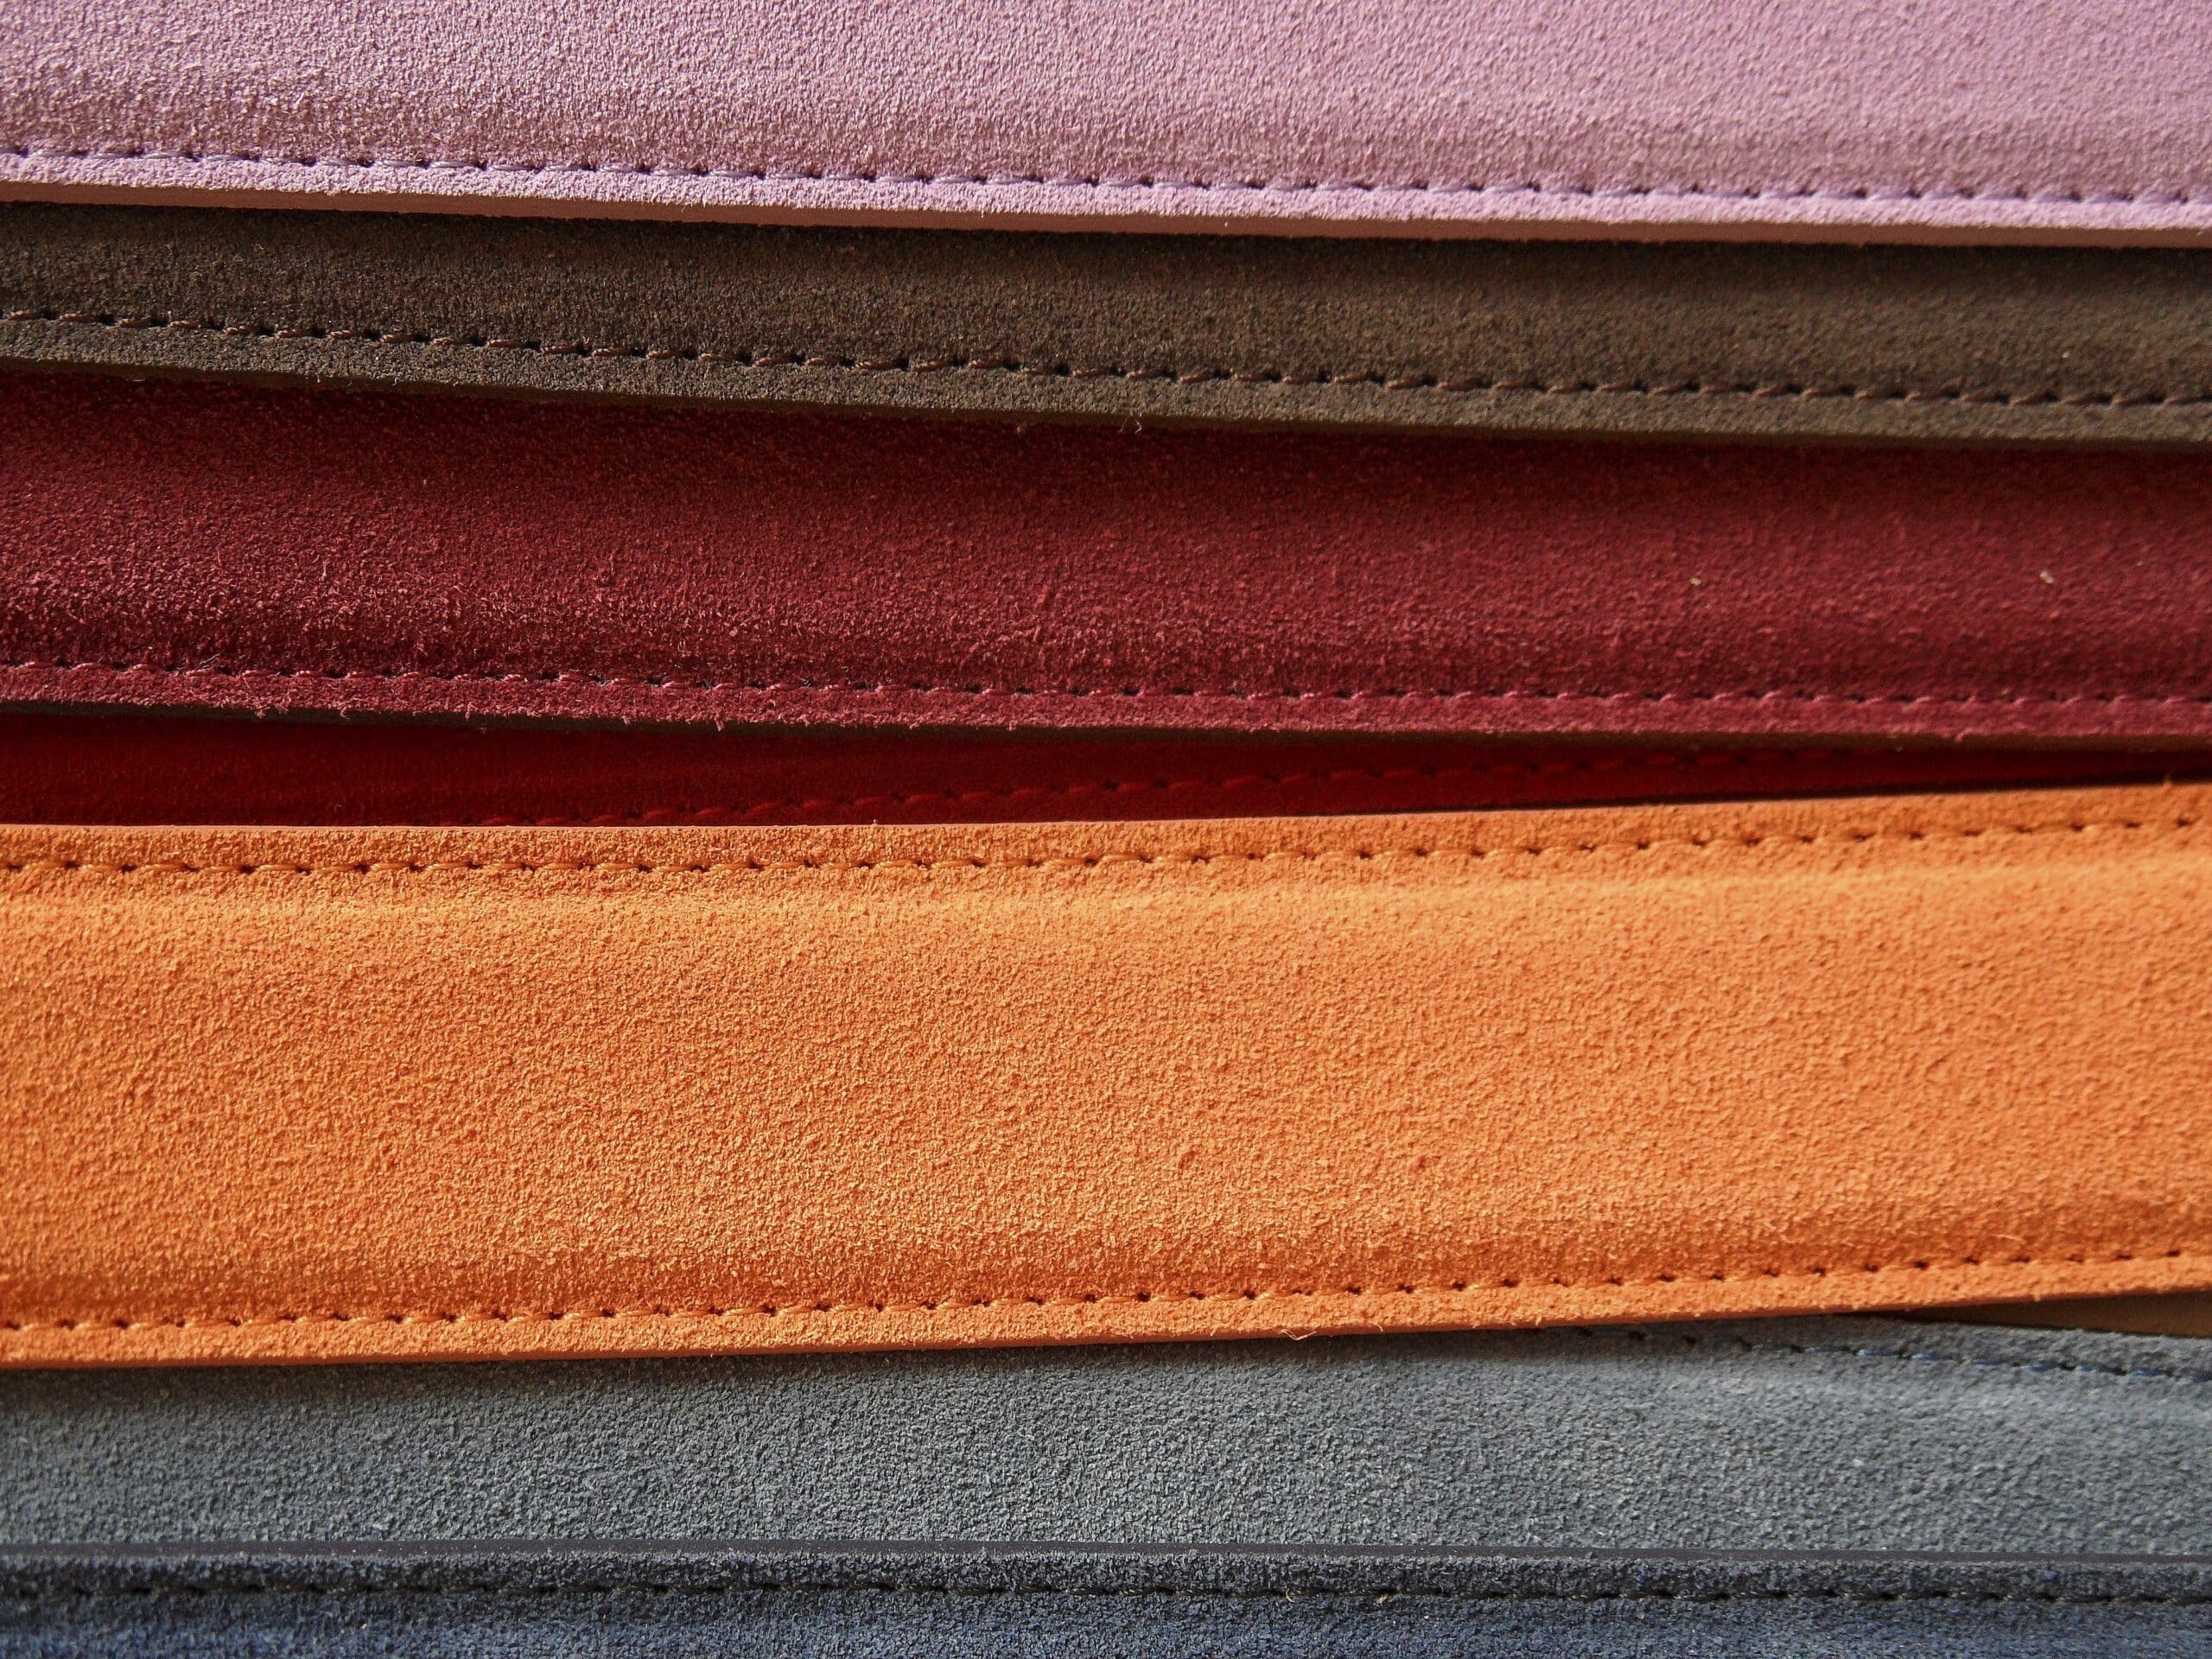 Animal, Vegan and Plant-Based Leather: What Is Truly More Climate-Friendly?